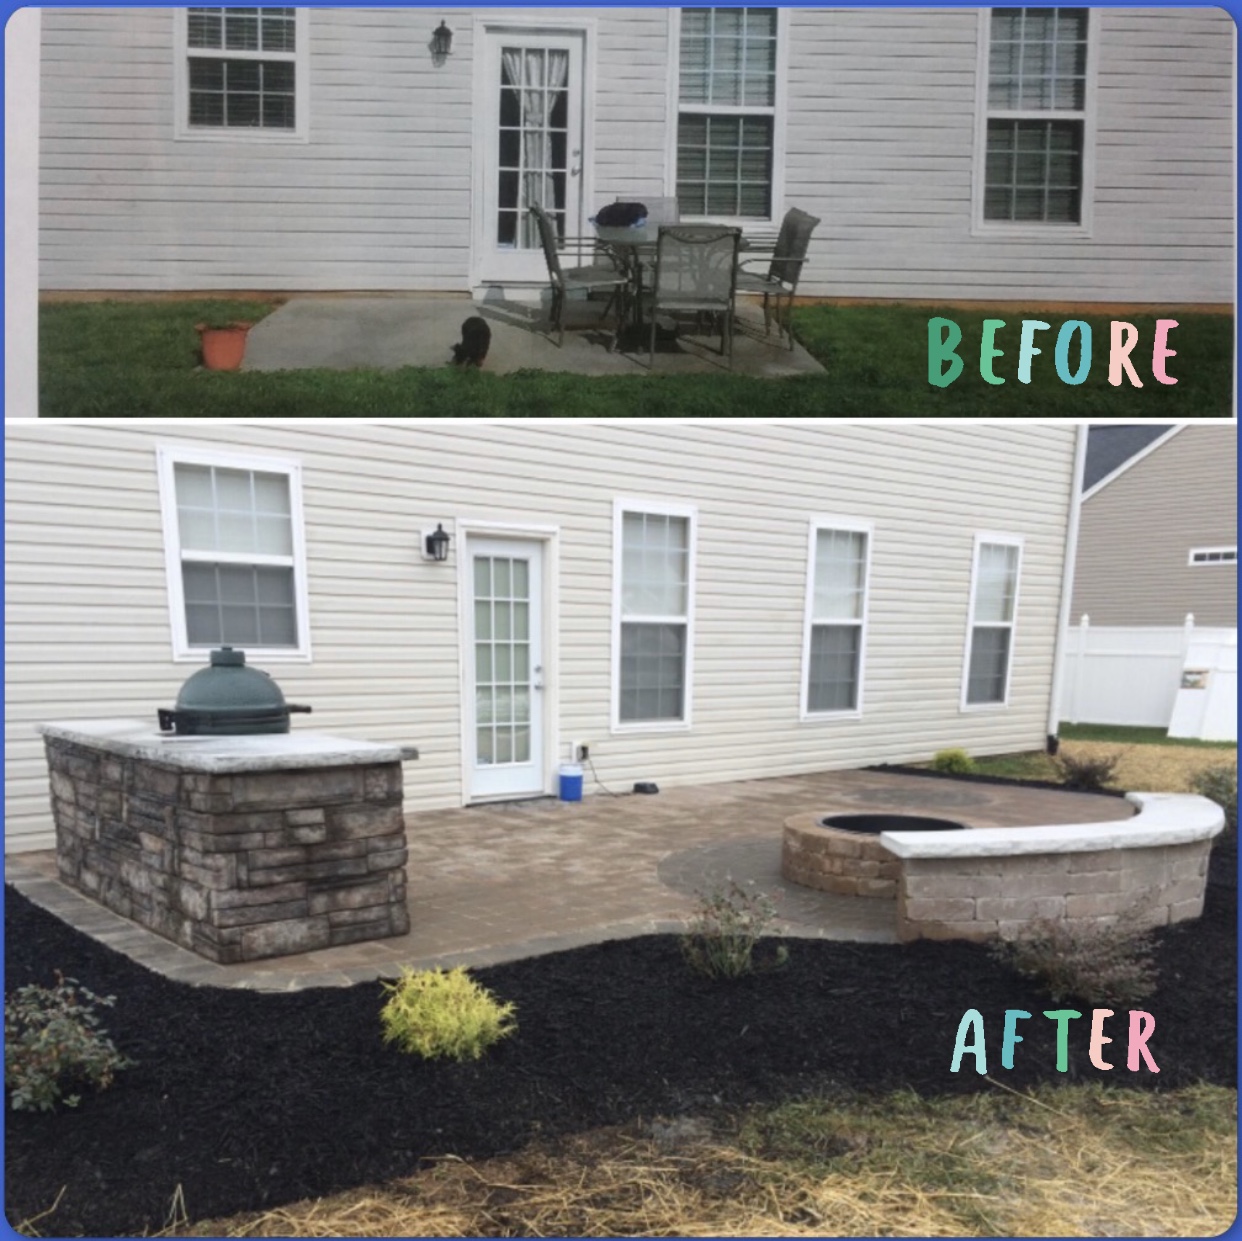 landscaping ideas - before and after 1